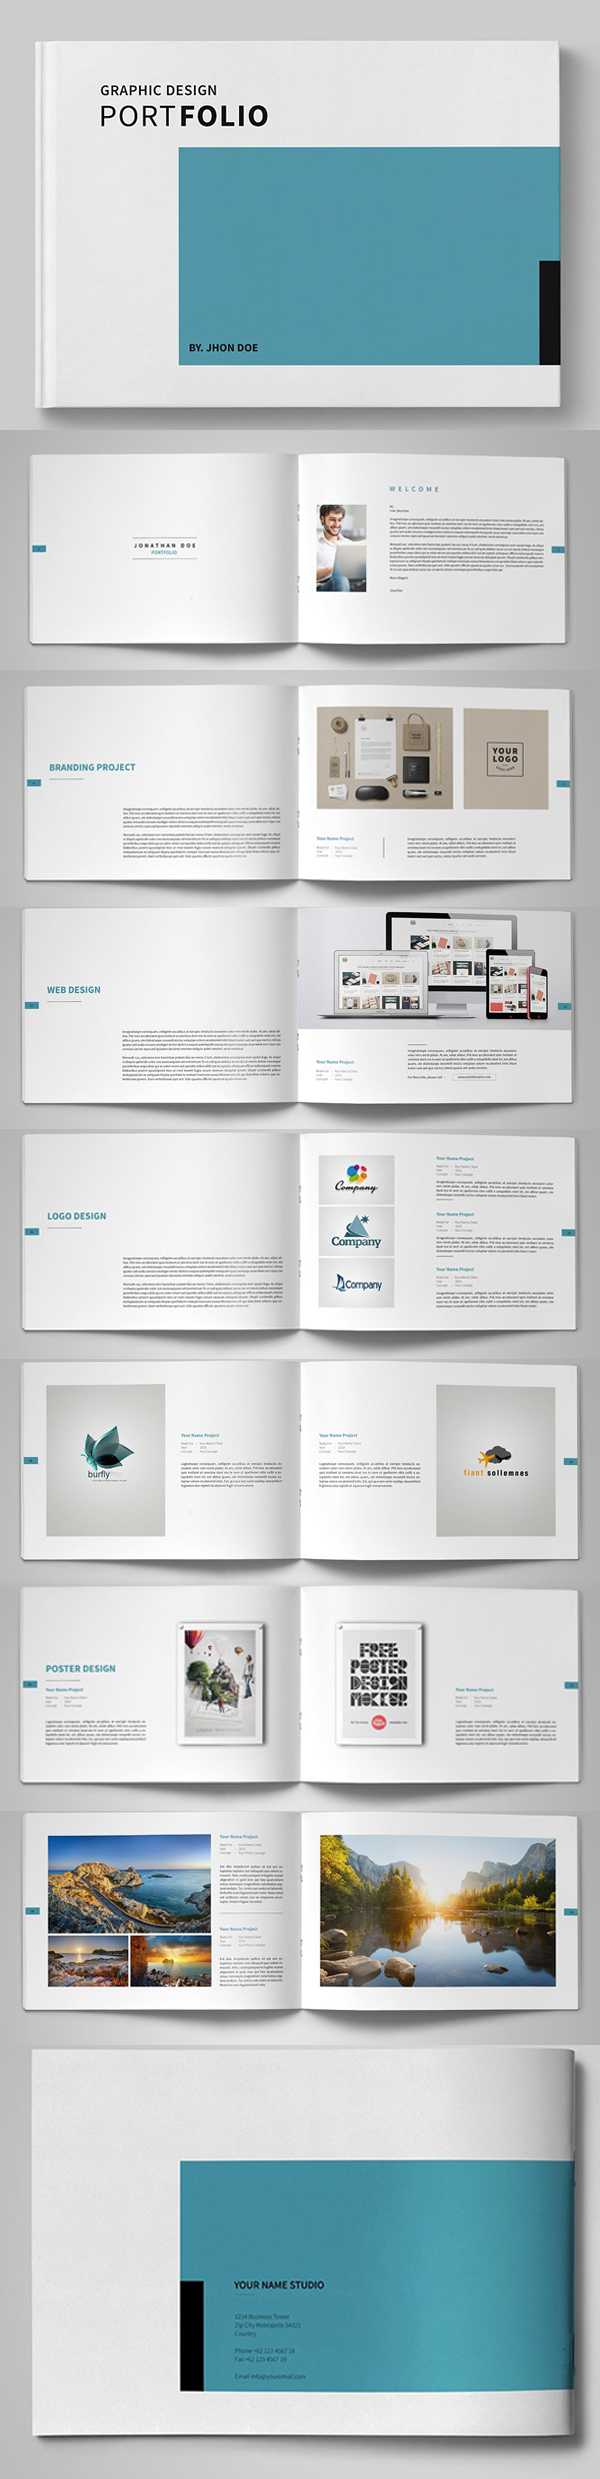 20 New Professional Catalog Brochure Templates | Design Throughout Indesign Templates Free Download Brochure